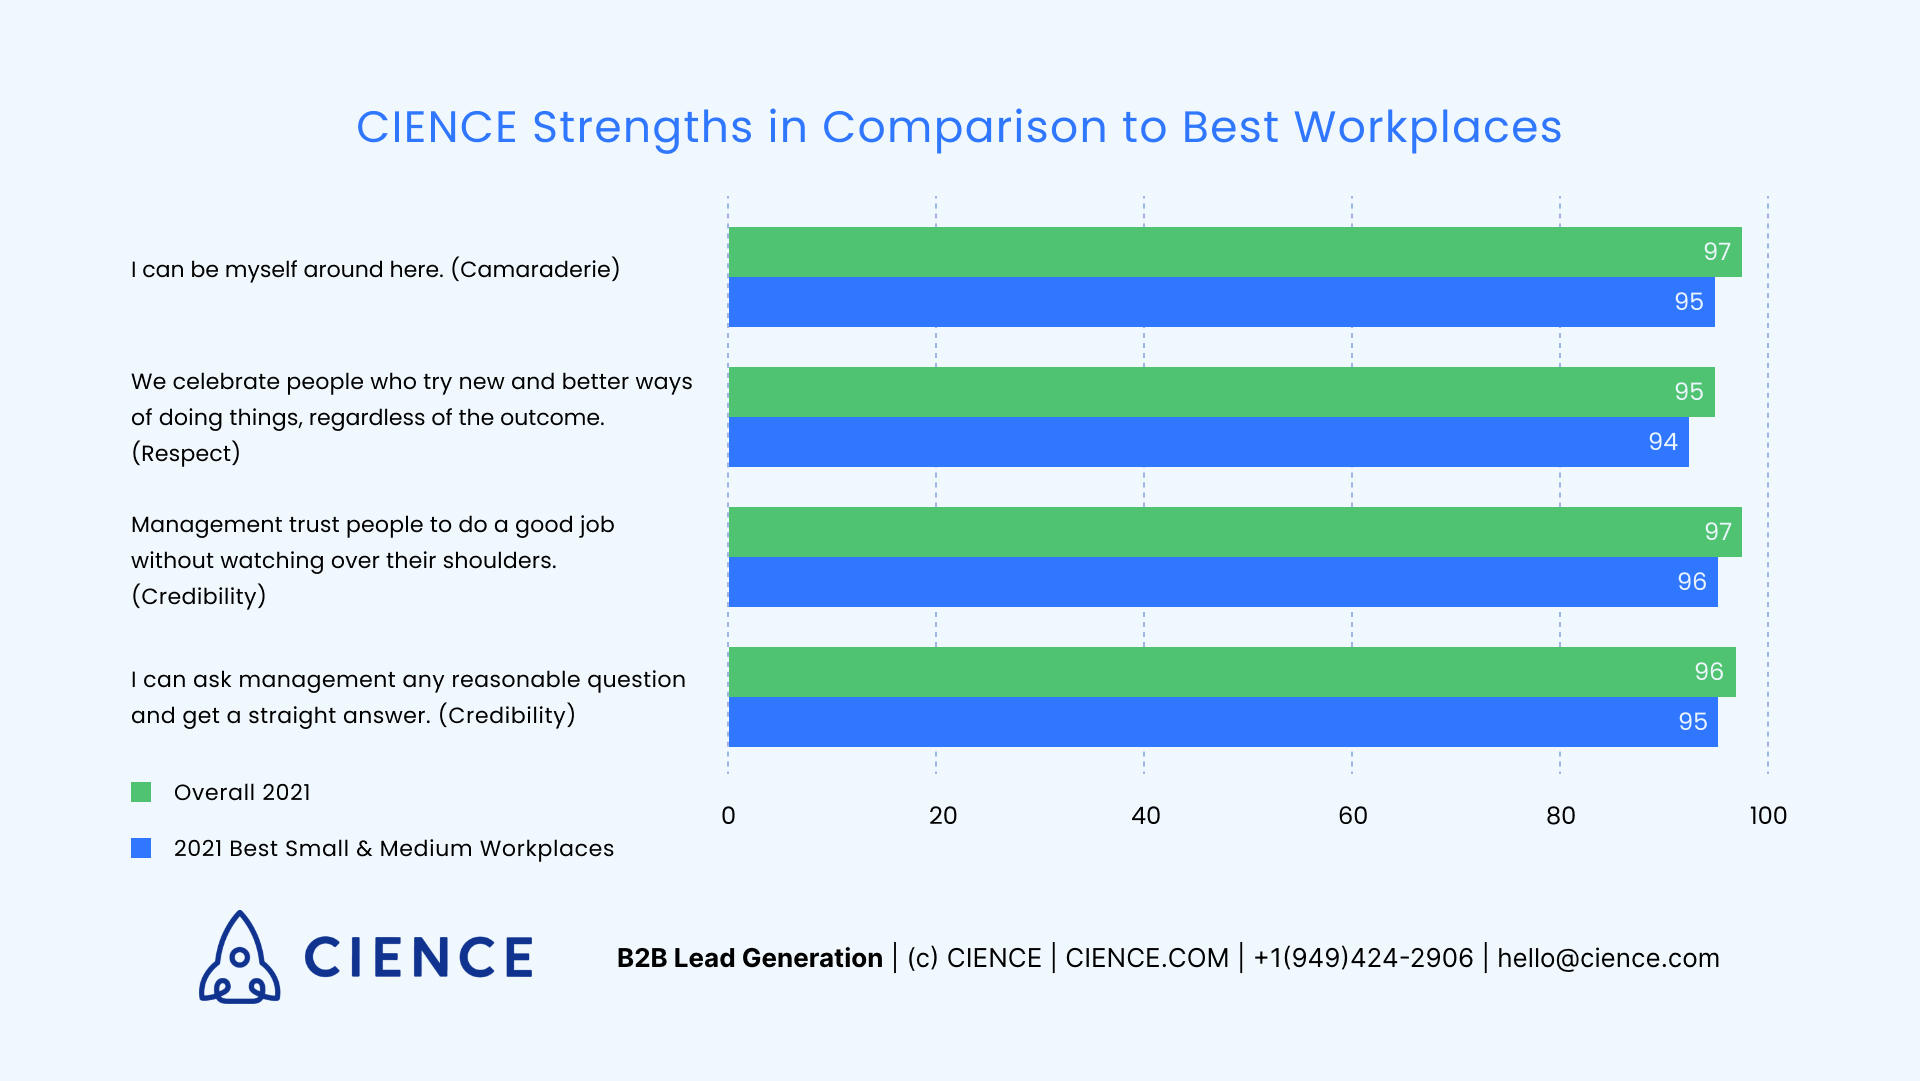 CIENCE Strengths in Comparison to Best Workplaces